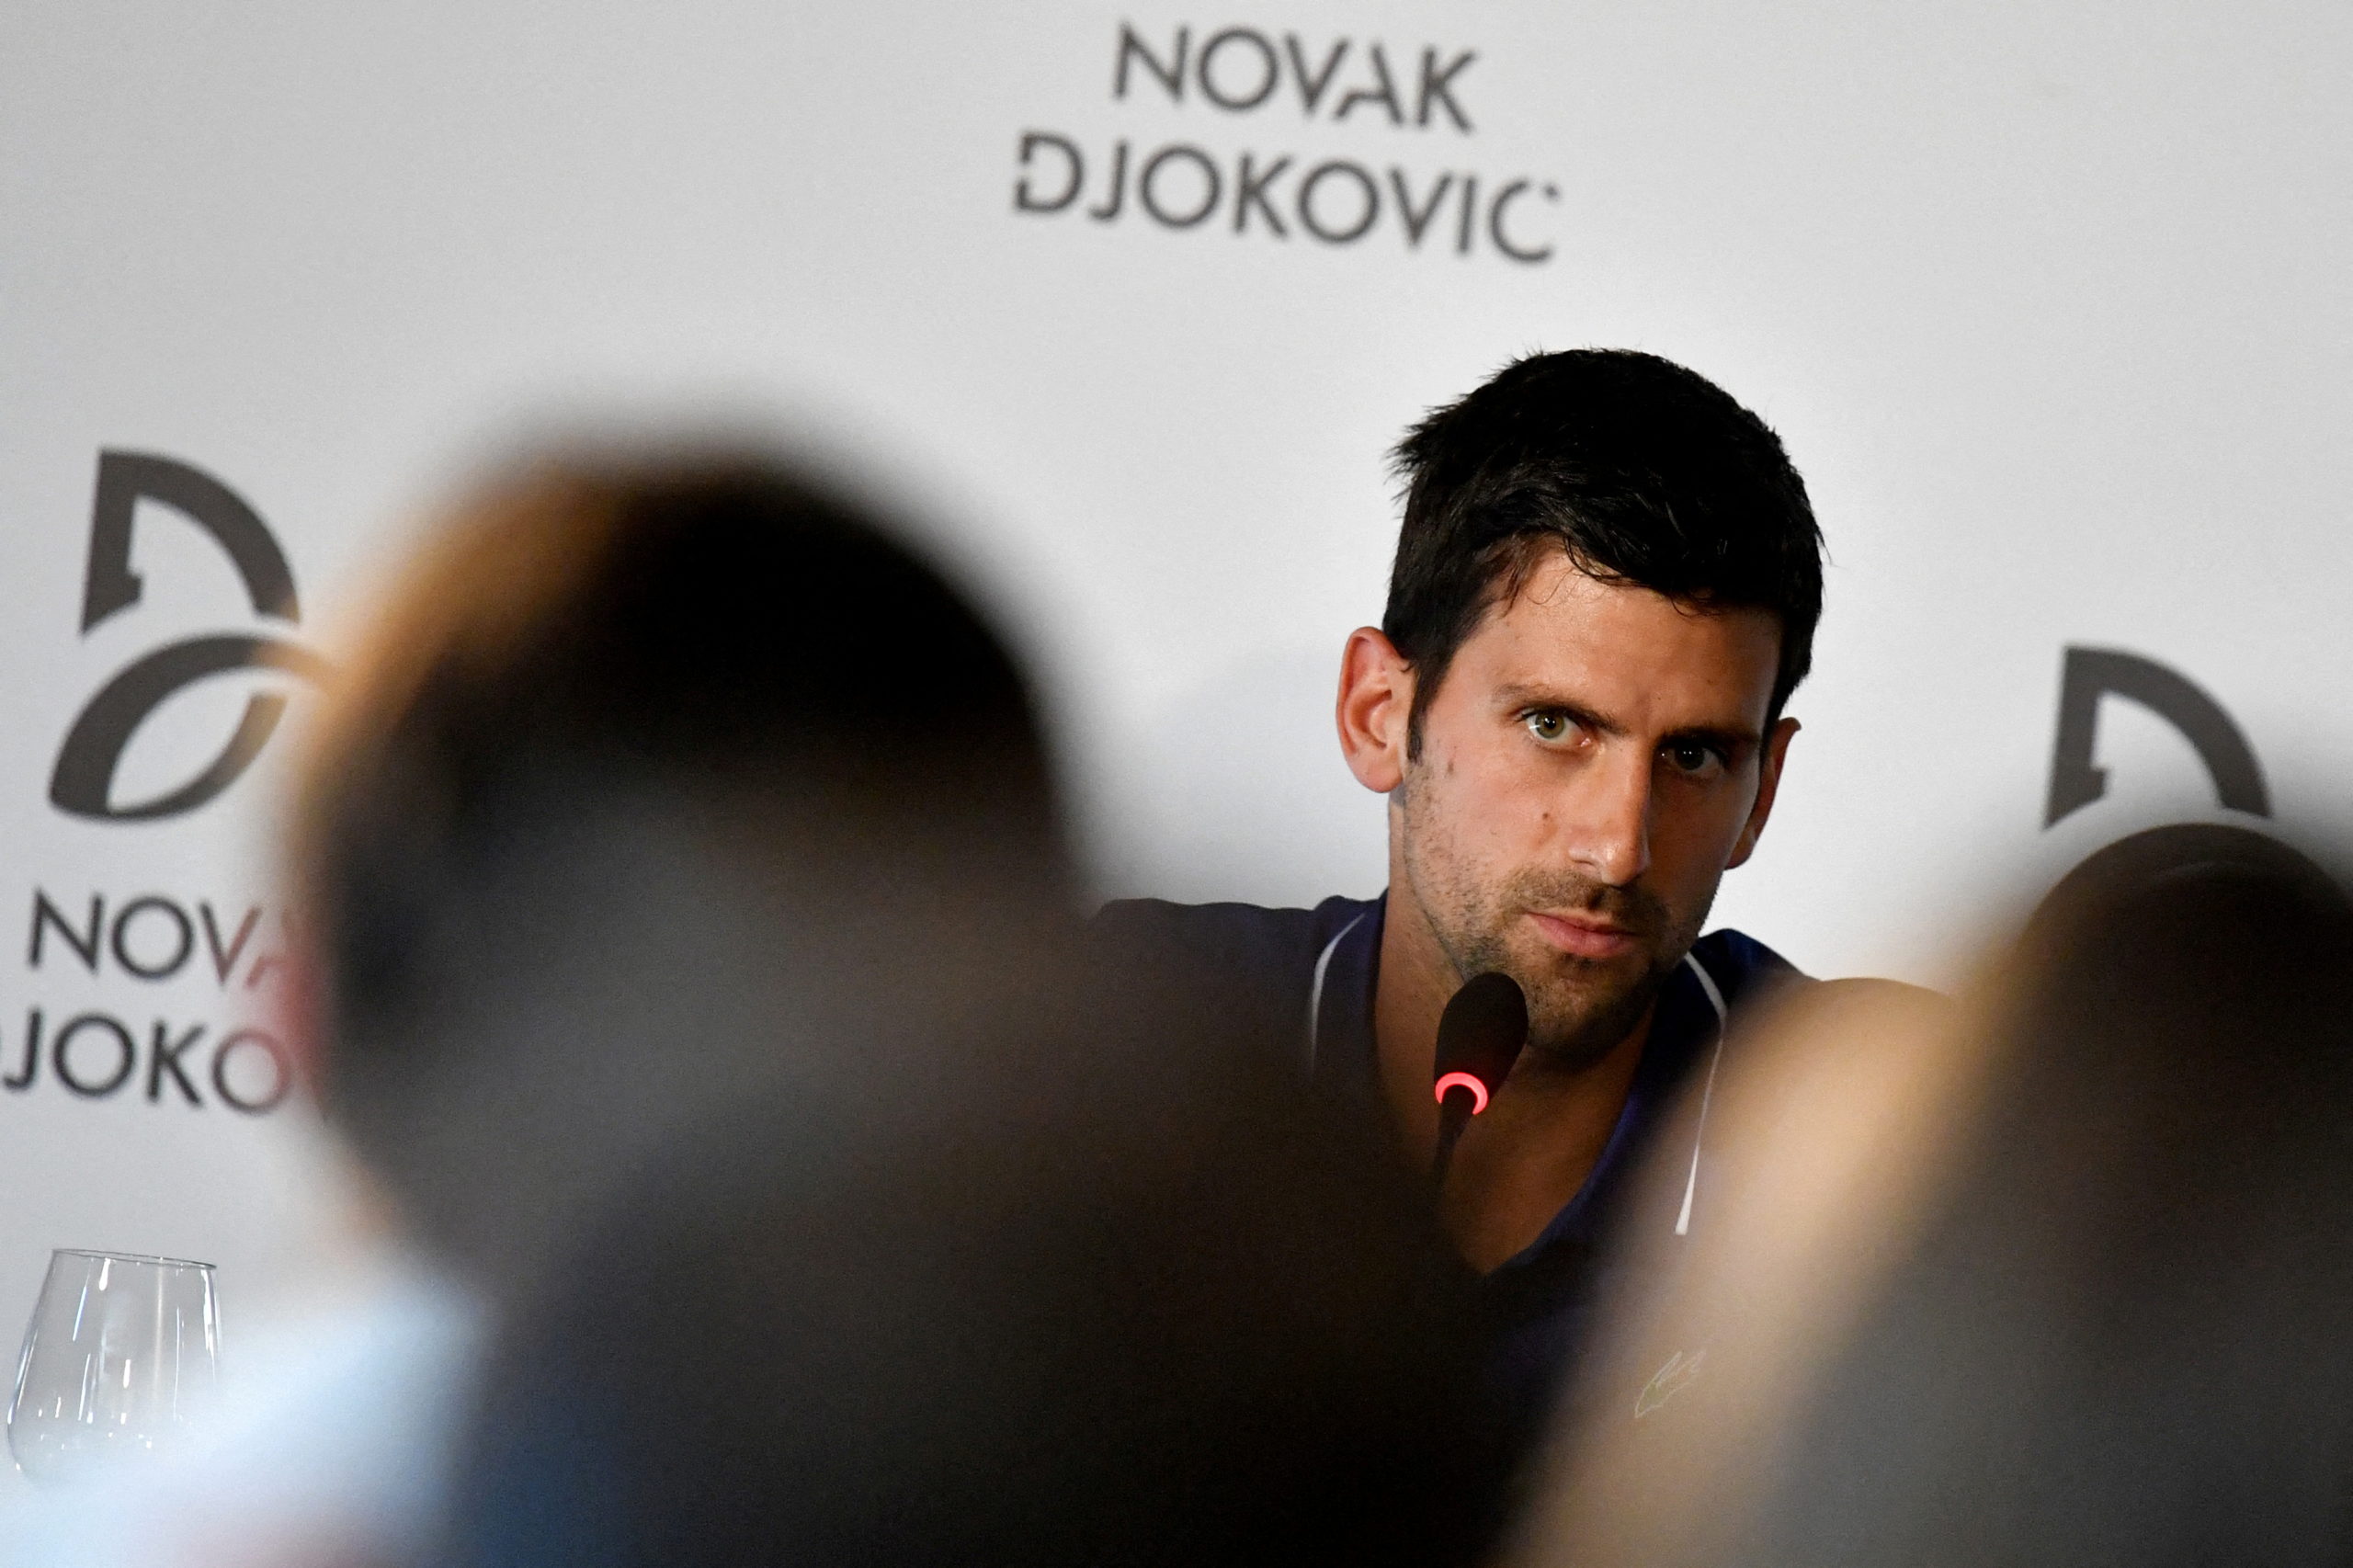 FILE PHOTO: FILE PHOTO: Former world No.1 tennis player Novak Djokovic speaks during a news conference in Belgrade, Serbia July 26, 2017. 